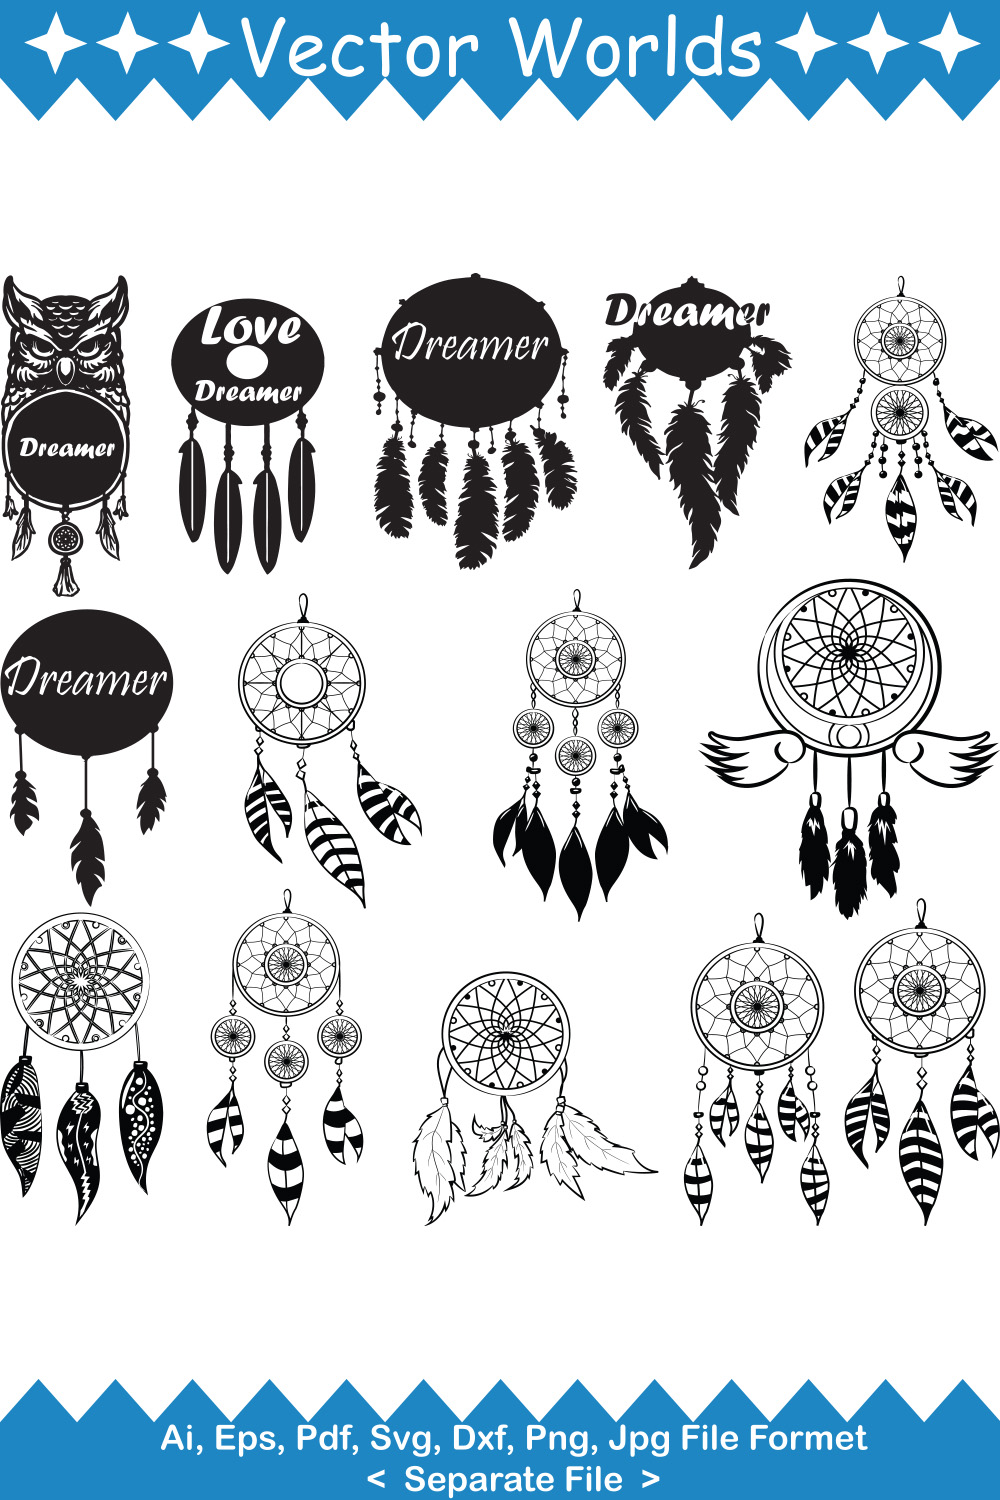 A set of beautiful images of Dream Catcher silhouettes